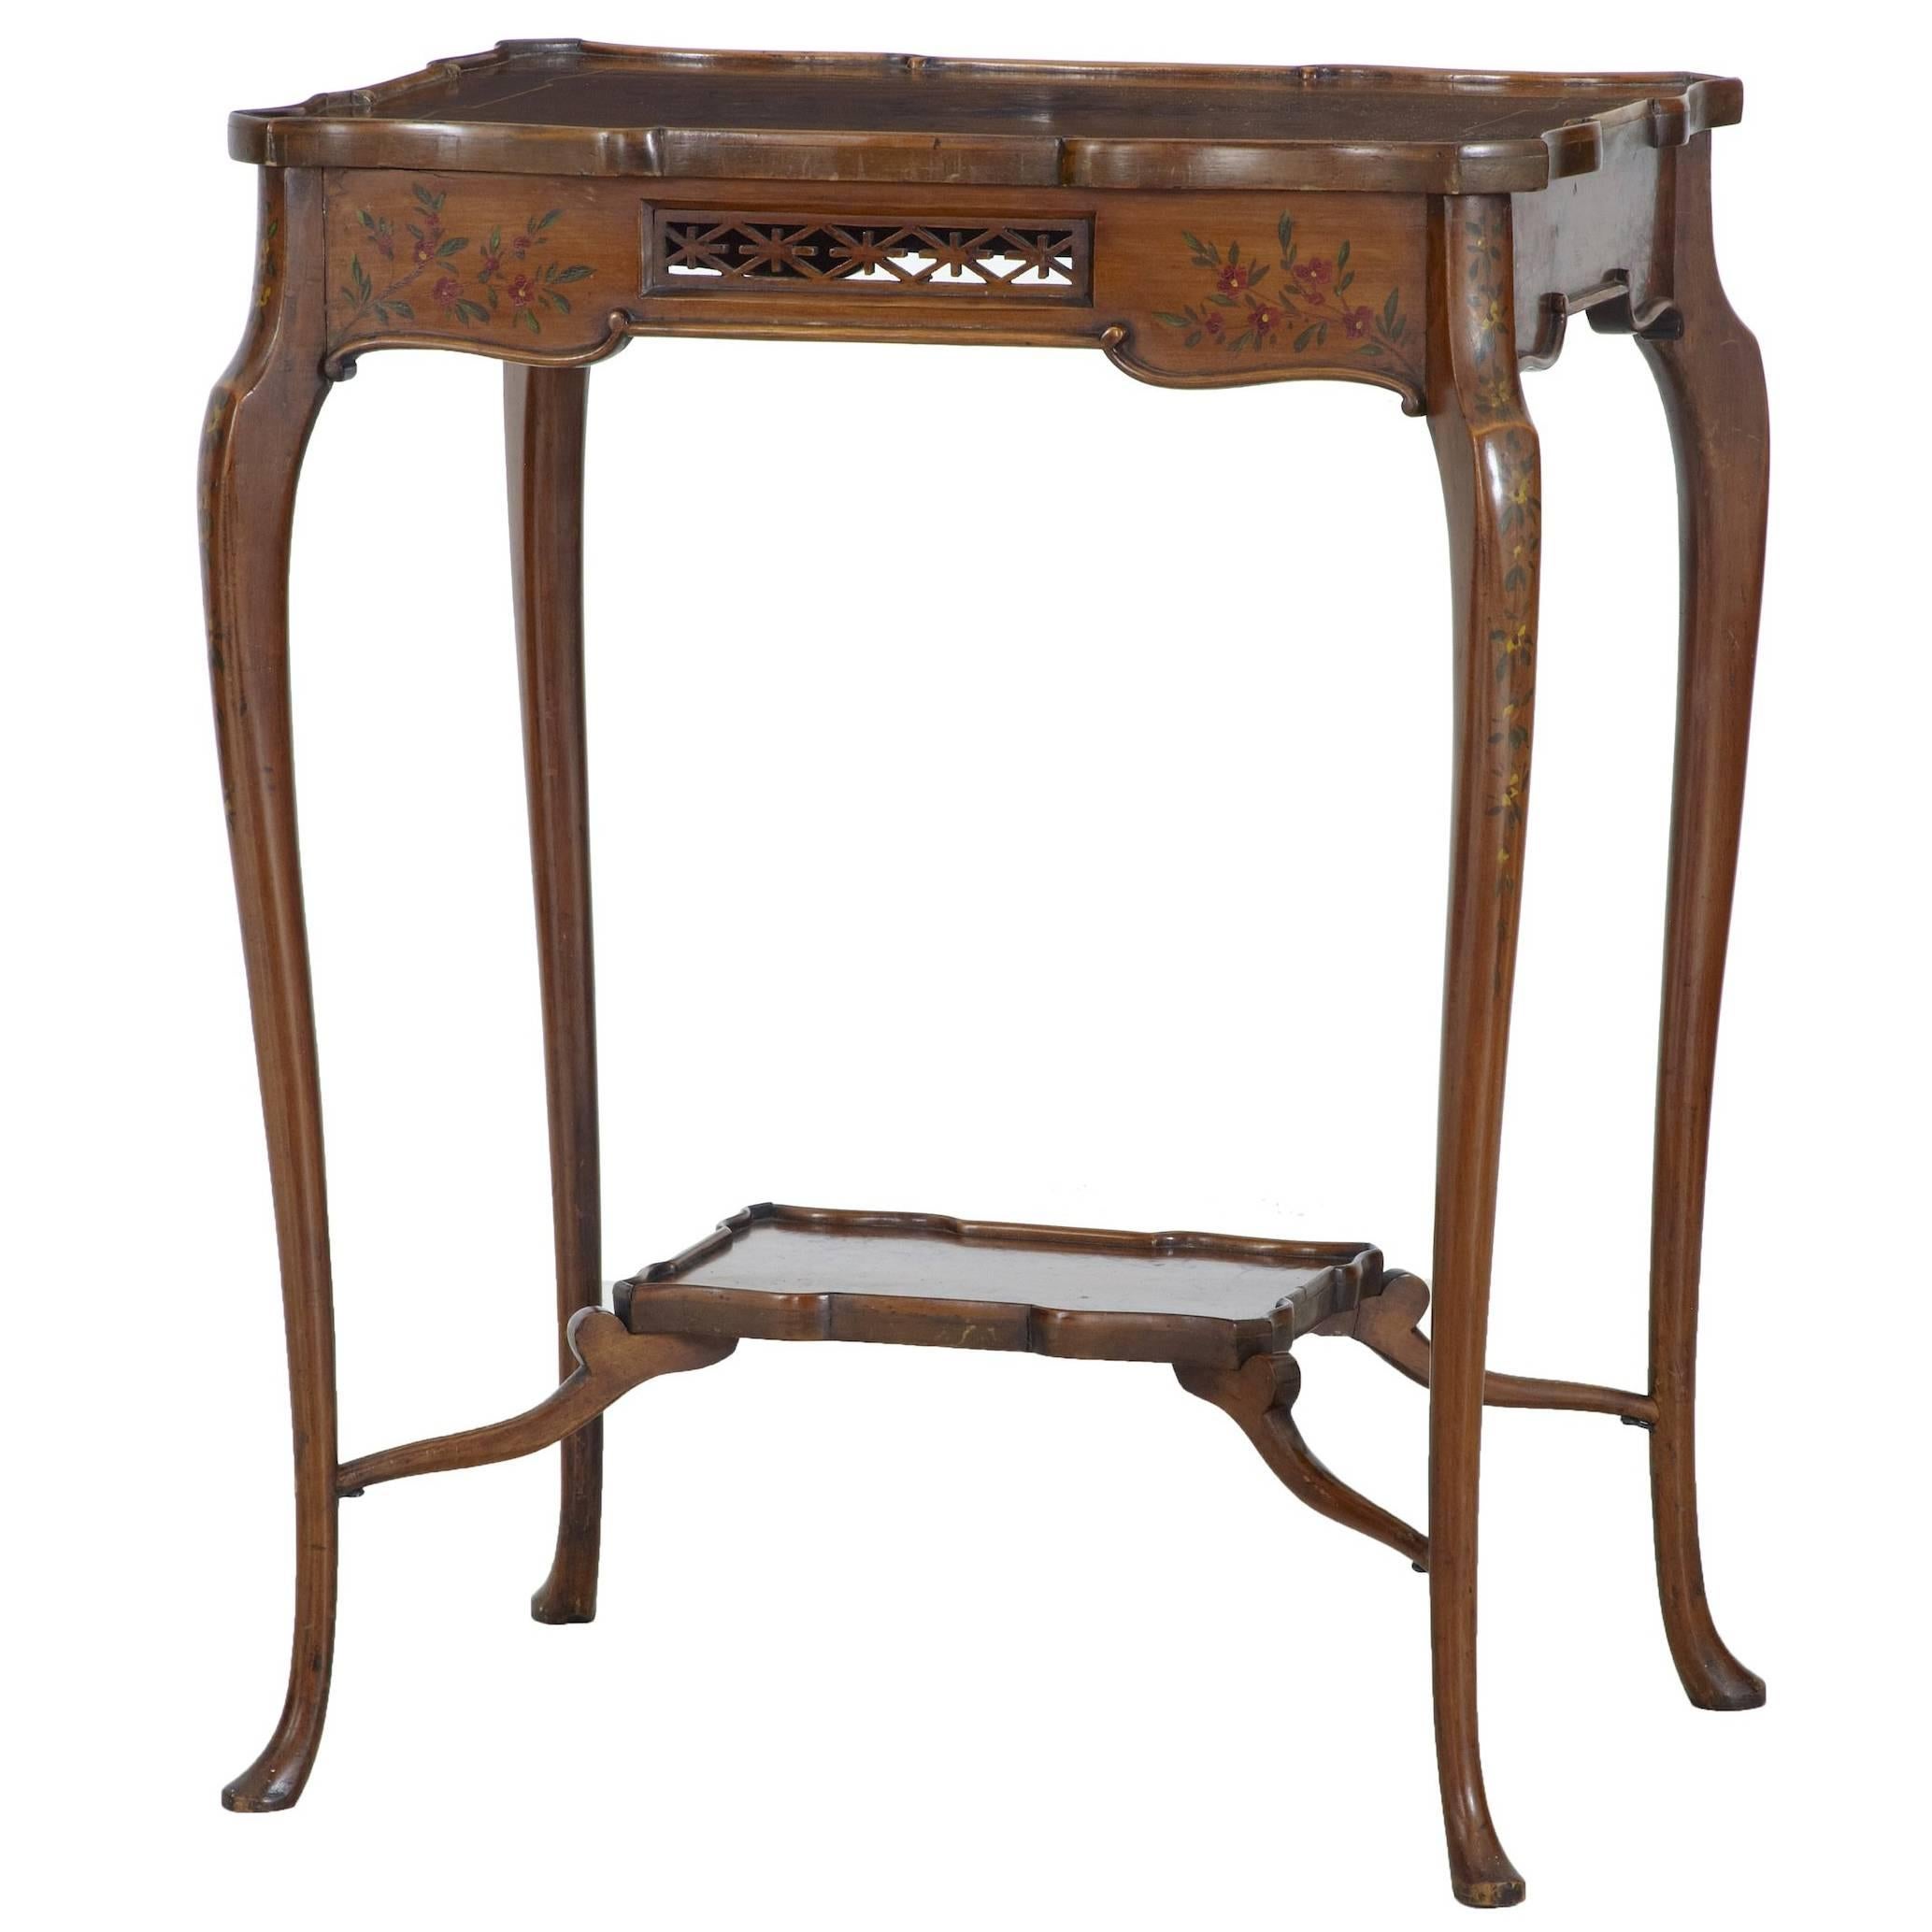 Early 20th Century Sheraton Revival Satinwood Side Table